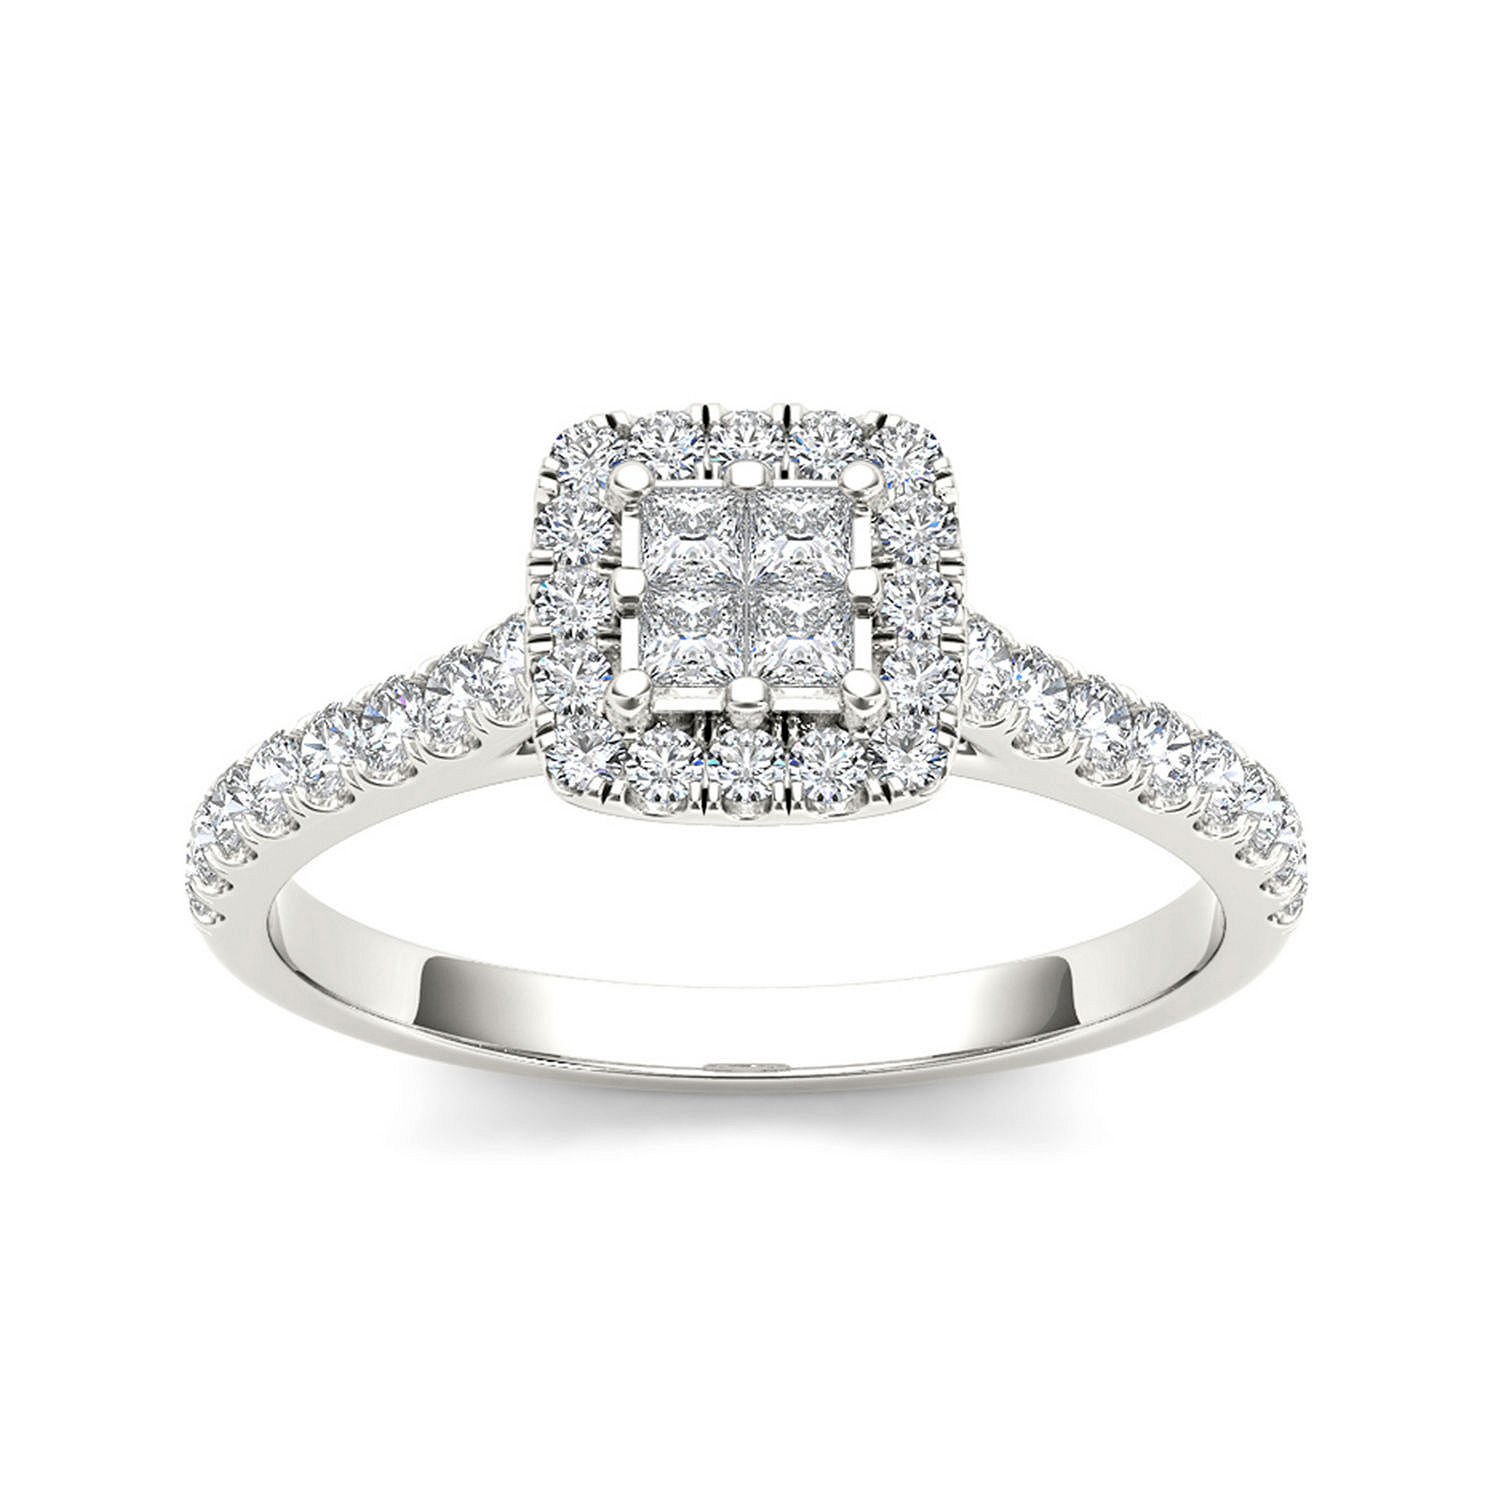 1/2 CT. T.W. Diamond 10K White Gold Engagement Ring, Color: White Gold ...